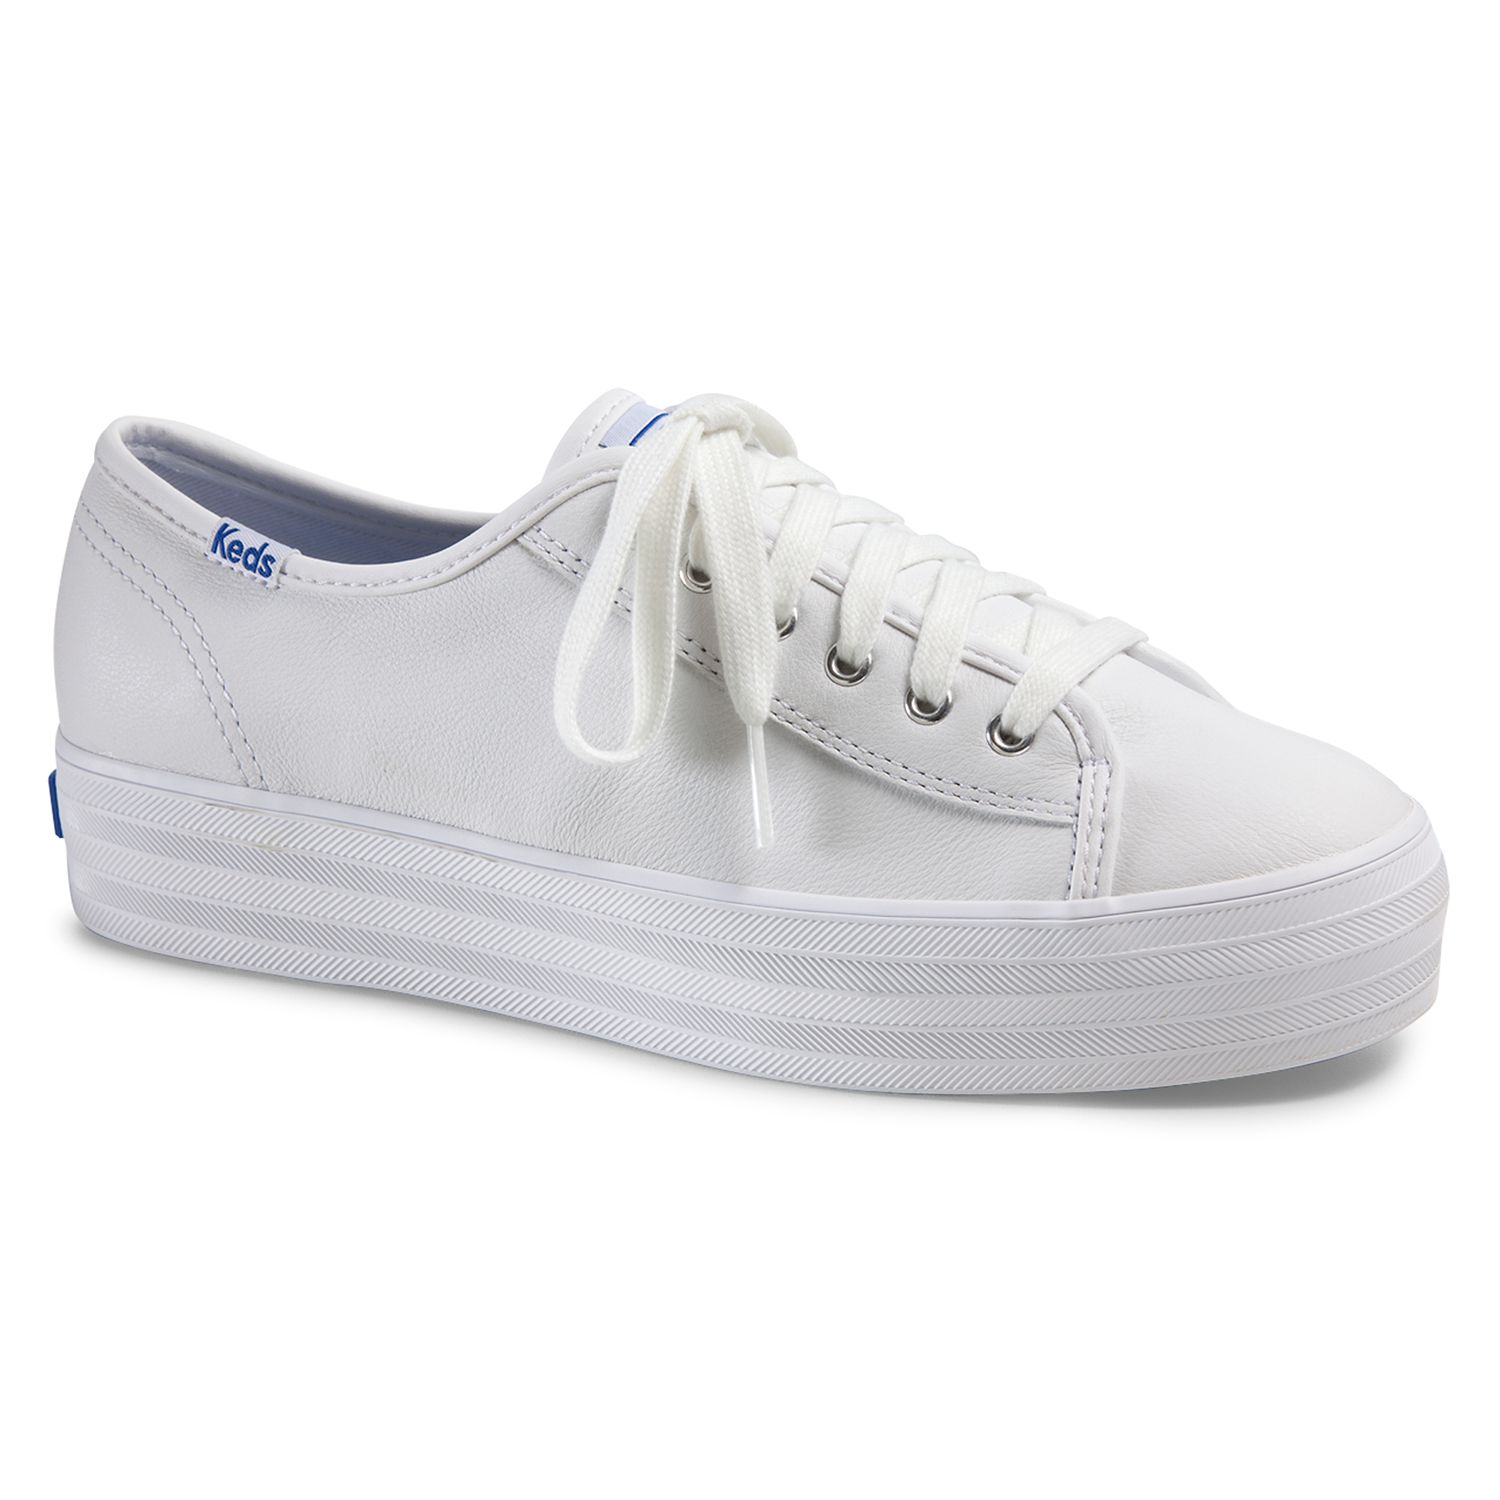 keds shoes white sneakers